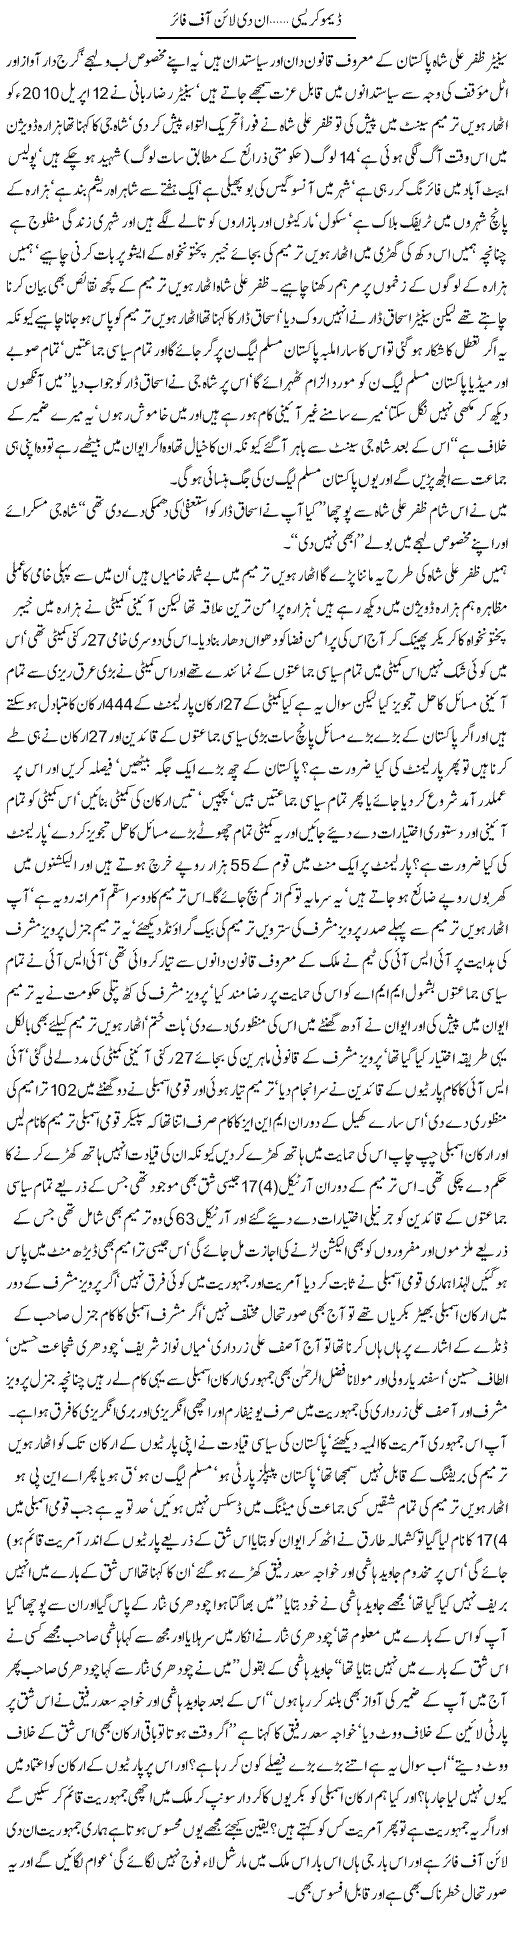 Democracy Line of fire Express Column Javed Chaudhary 15 April 2010